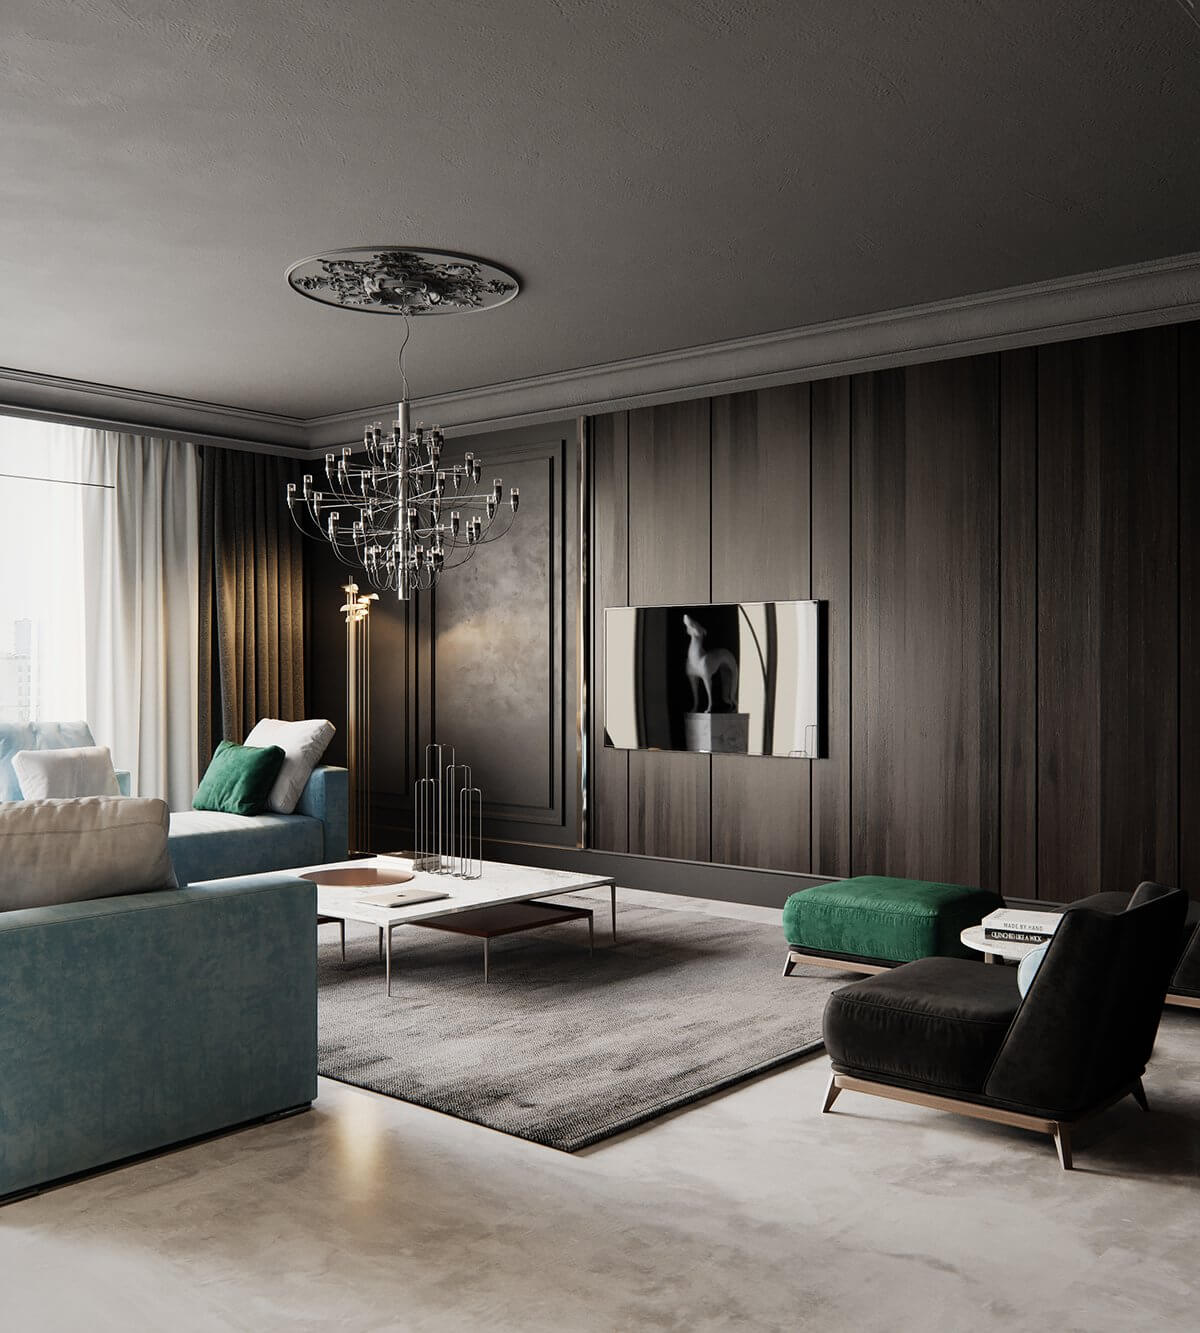 Moscow apartment living room tv unit - cgi visualization